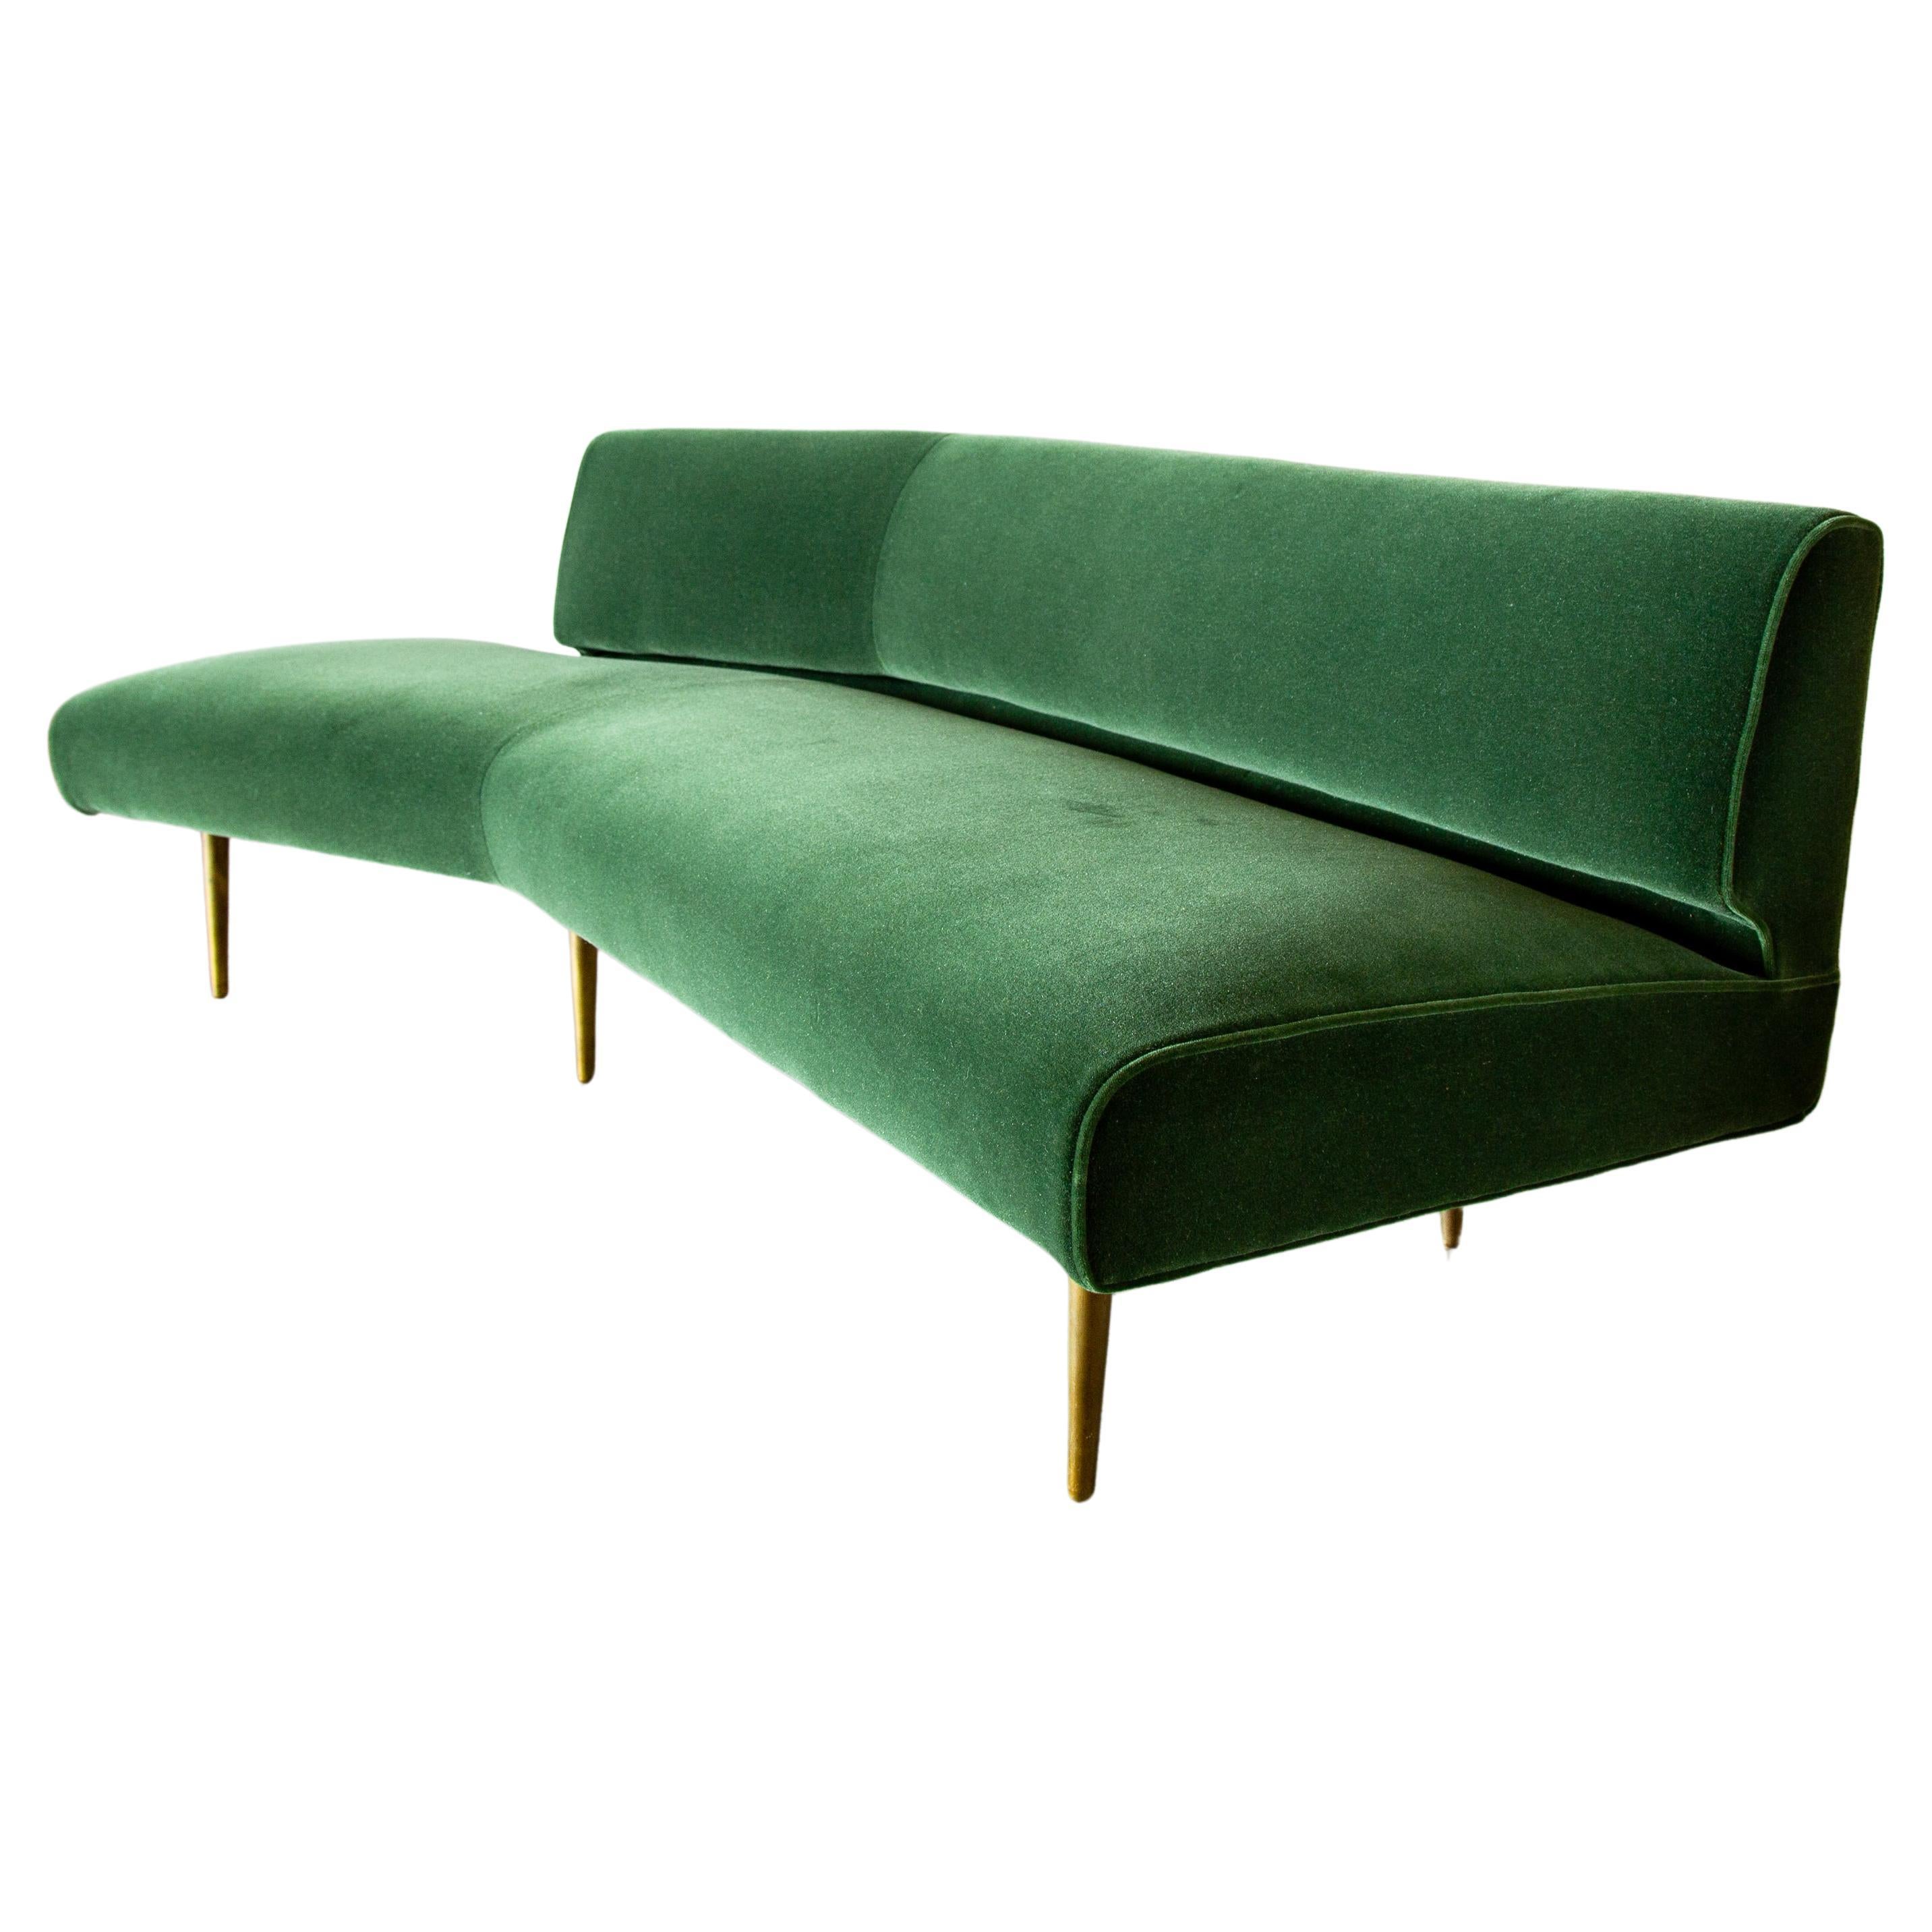 1950s Edward Wormley for Dunbar no. 4756 wing shaped sofa in Mohair and Brass